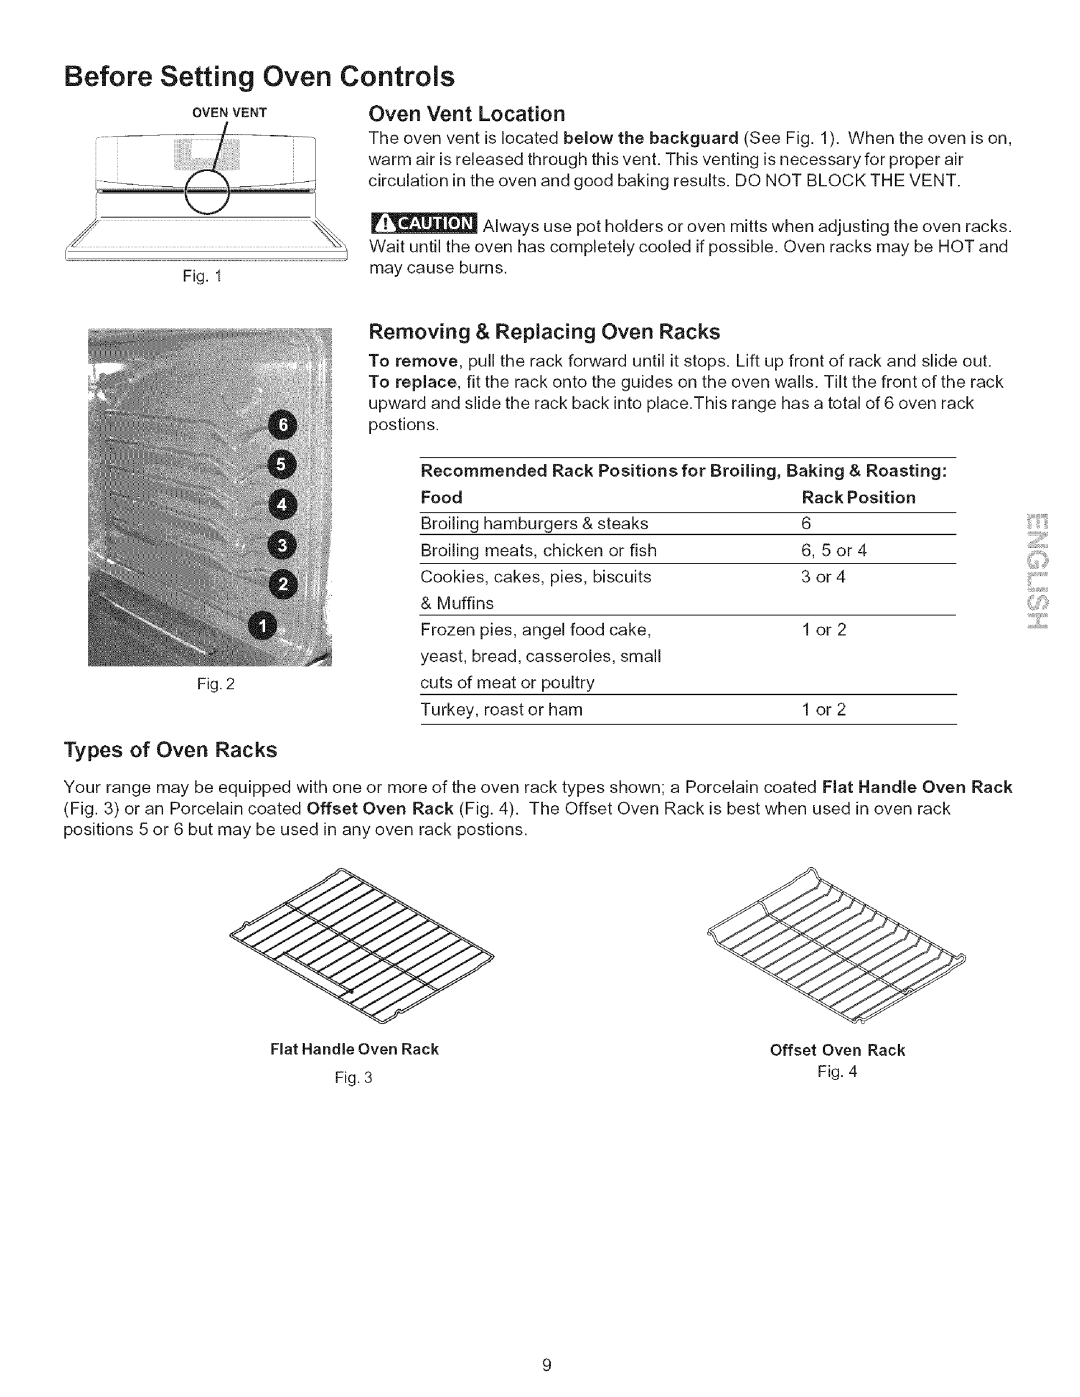 Kenmore 790.7943 manual Before Setting Oven Controls, Oven Vent Location, Removing, Replacing, Types of Oven Racks 